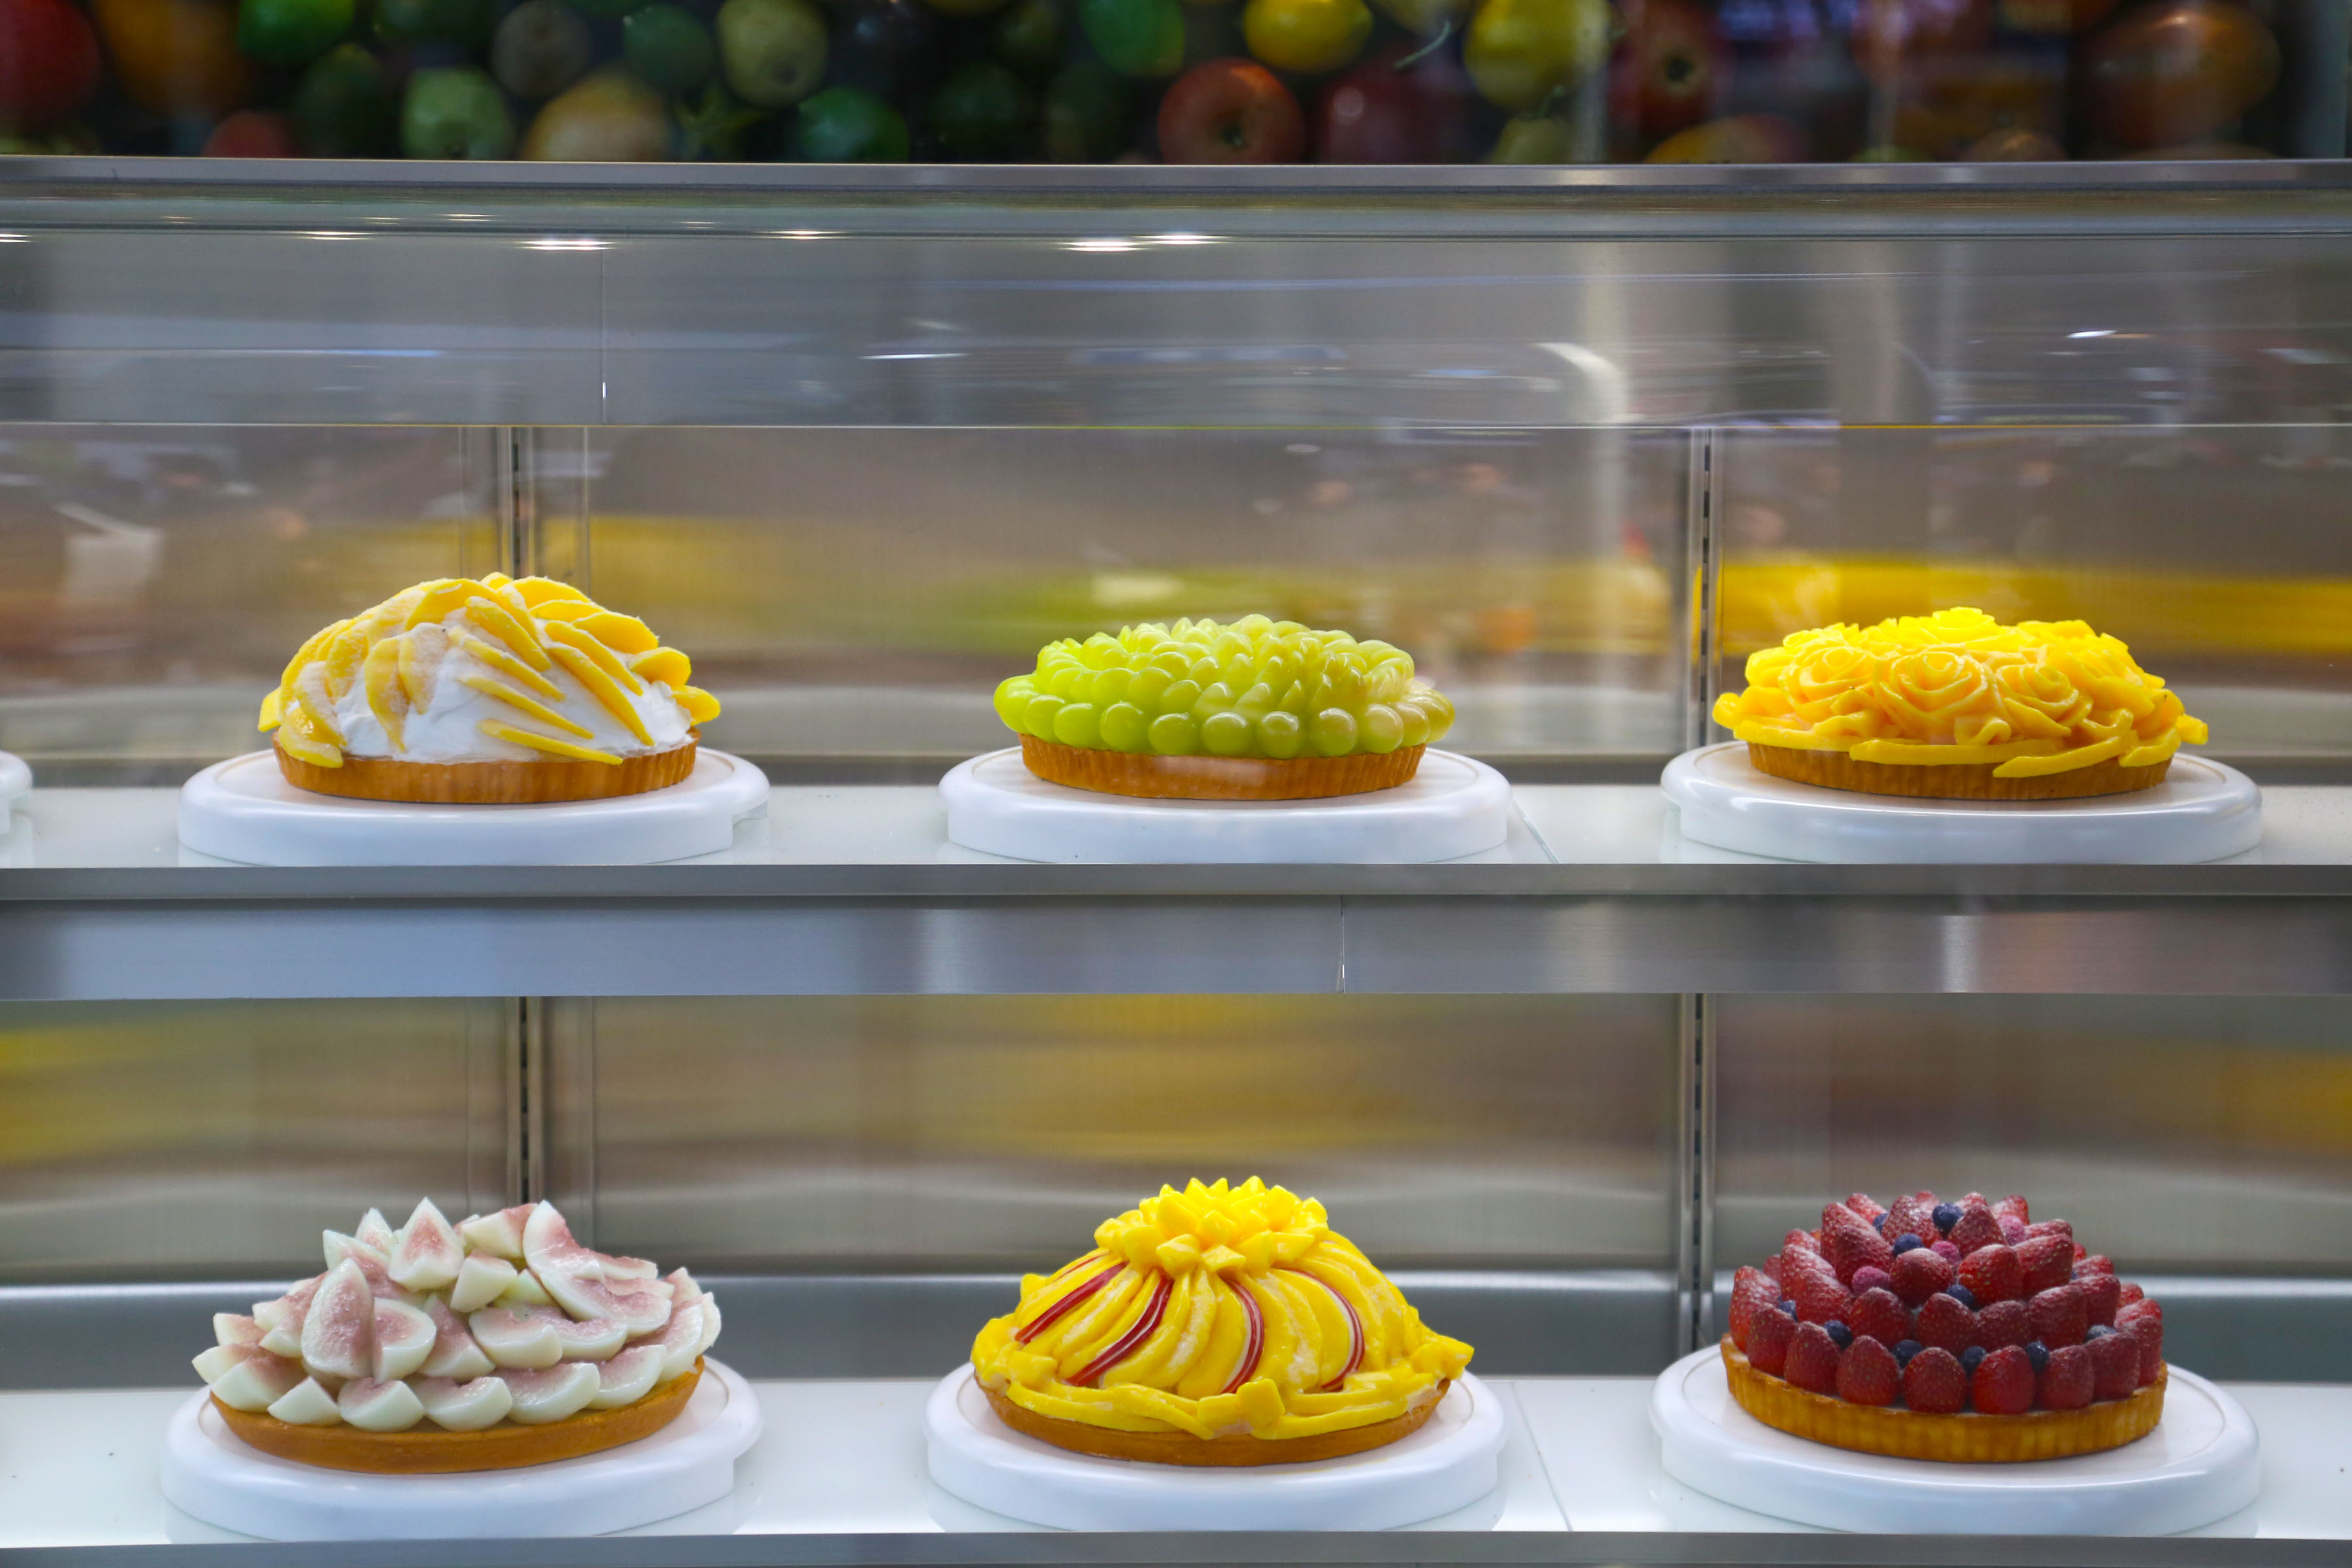 Attention to detail, Cakes on display, Tokyo, Japan